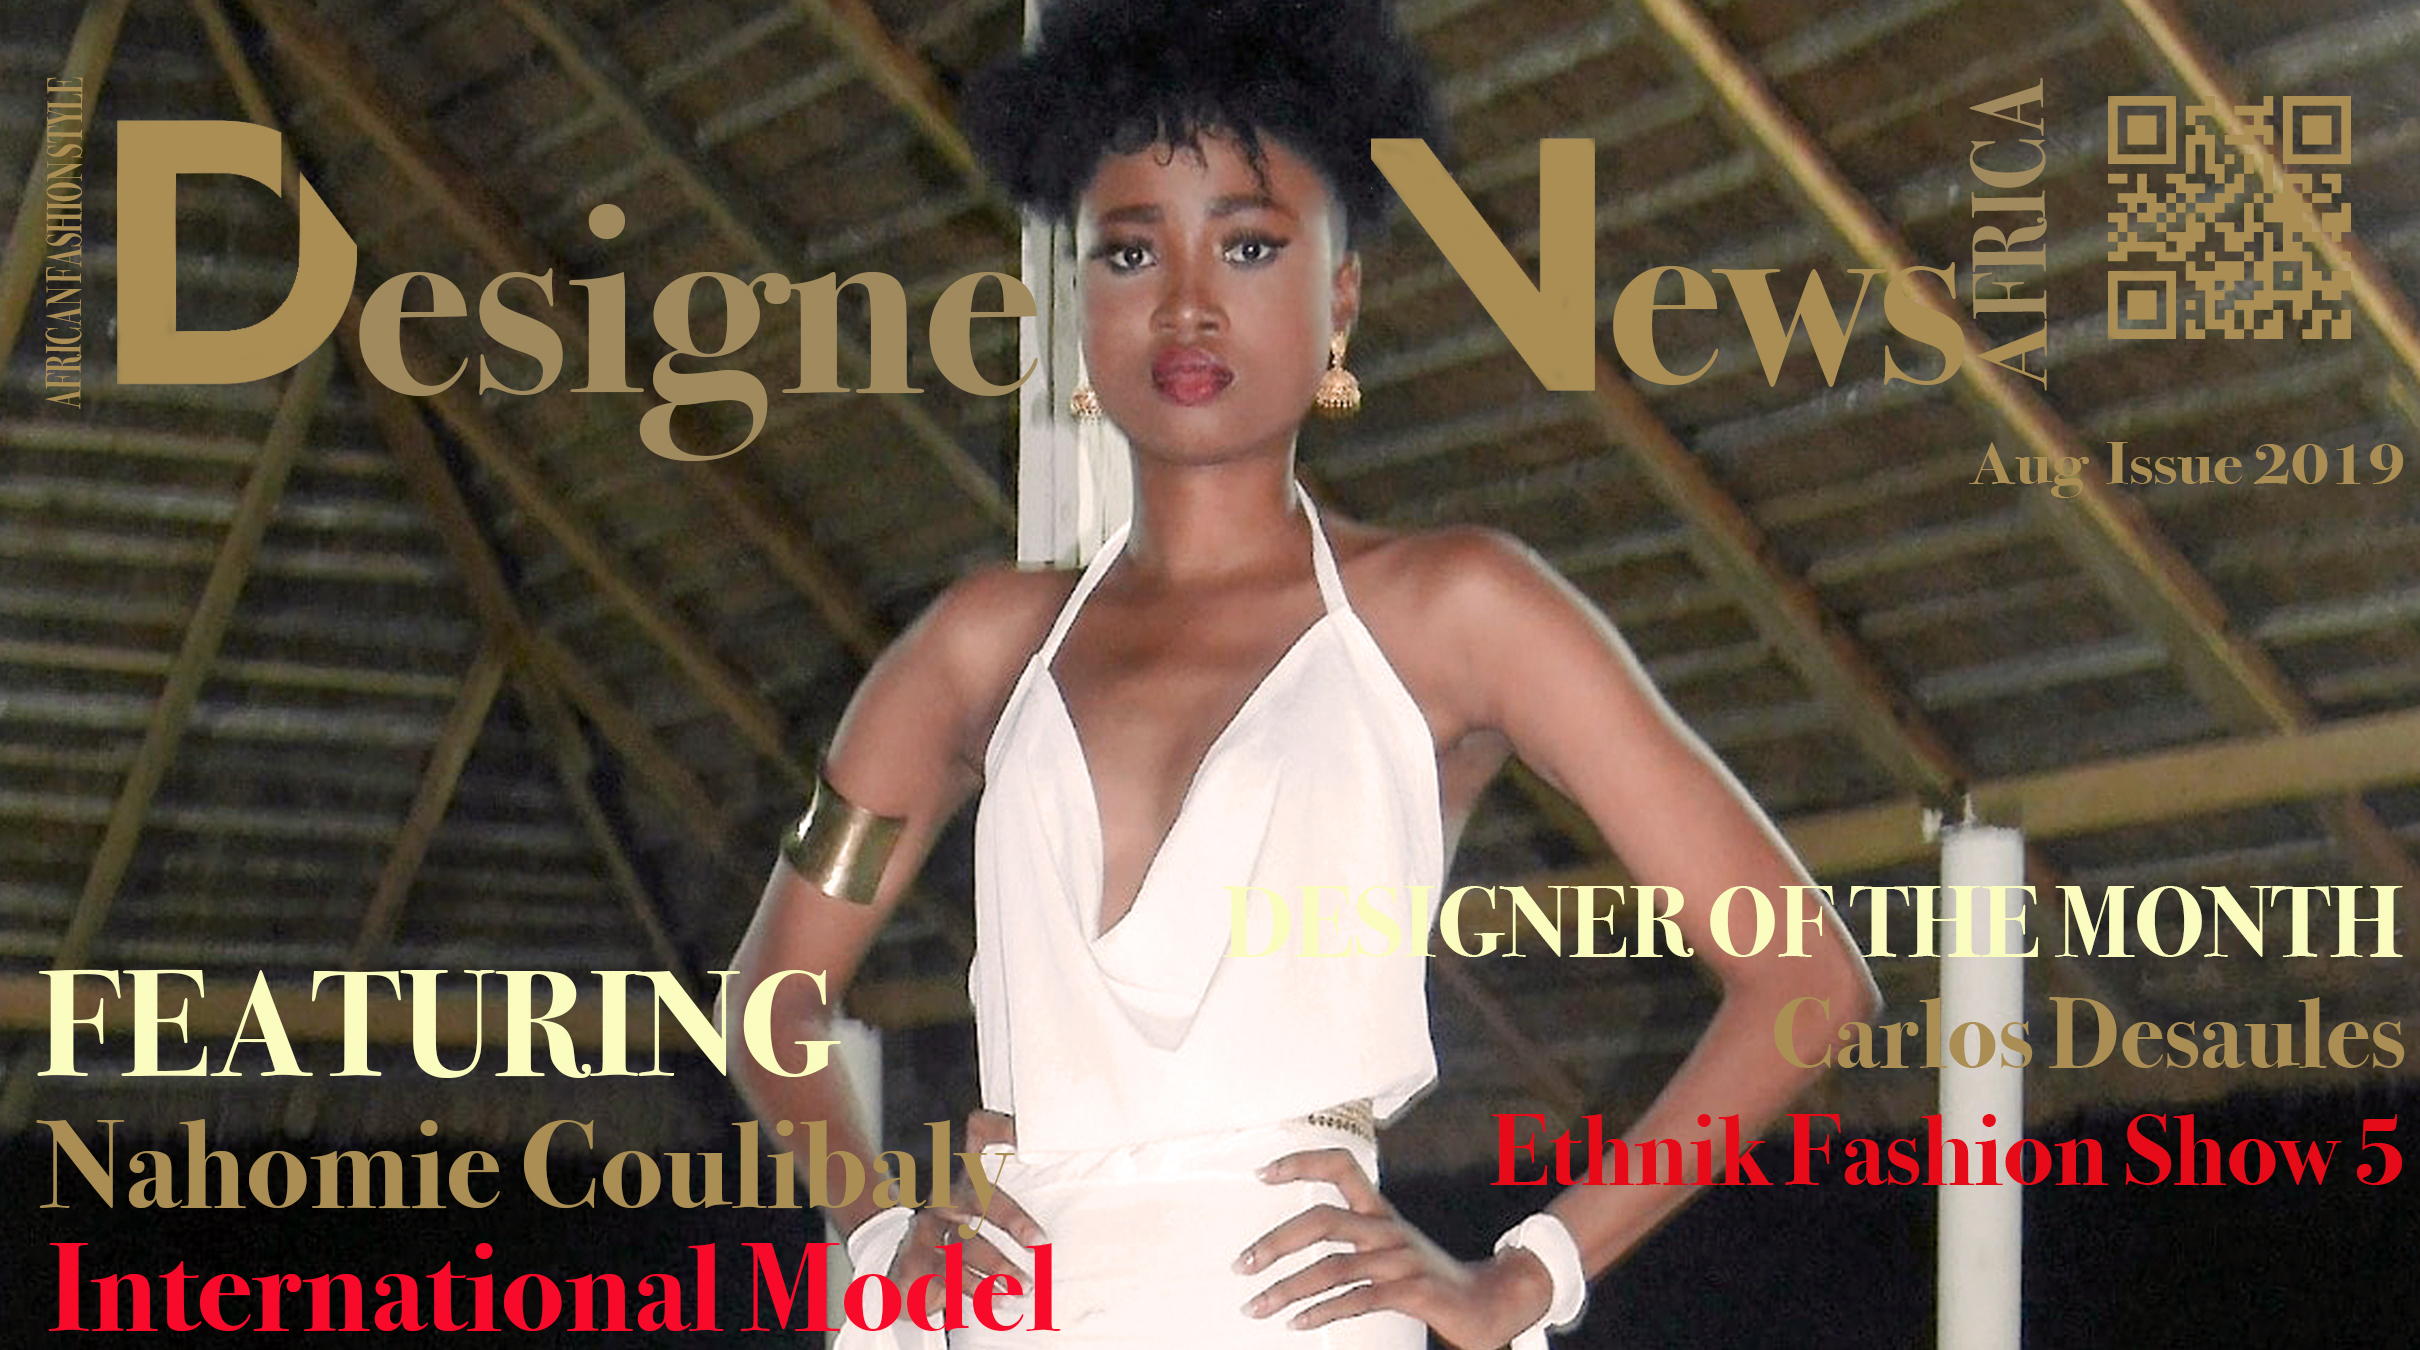 AFRICA-VOGUE-COVER-DN-AFRICA-COVER-NUMBER-69-AUG-5TH-2019-NAHOMIE-COULIBALY-INTERNATIONAL-MODEL-DN-AFRICA-Media-Partner